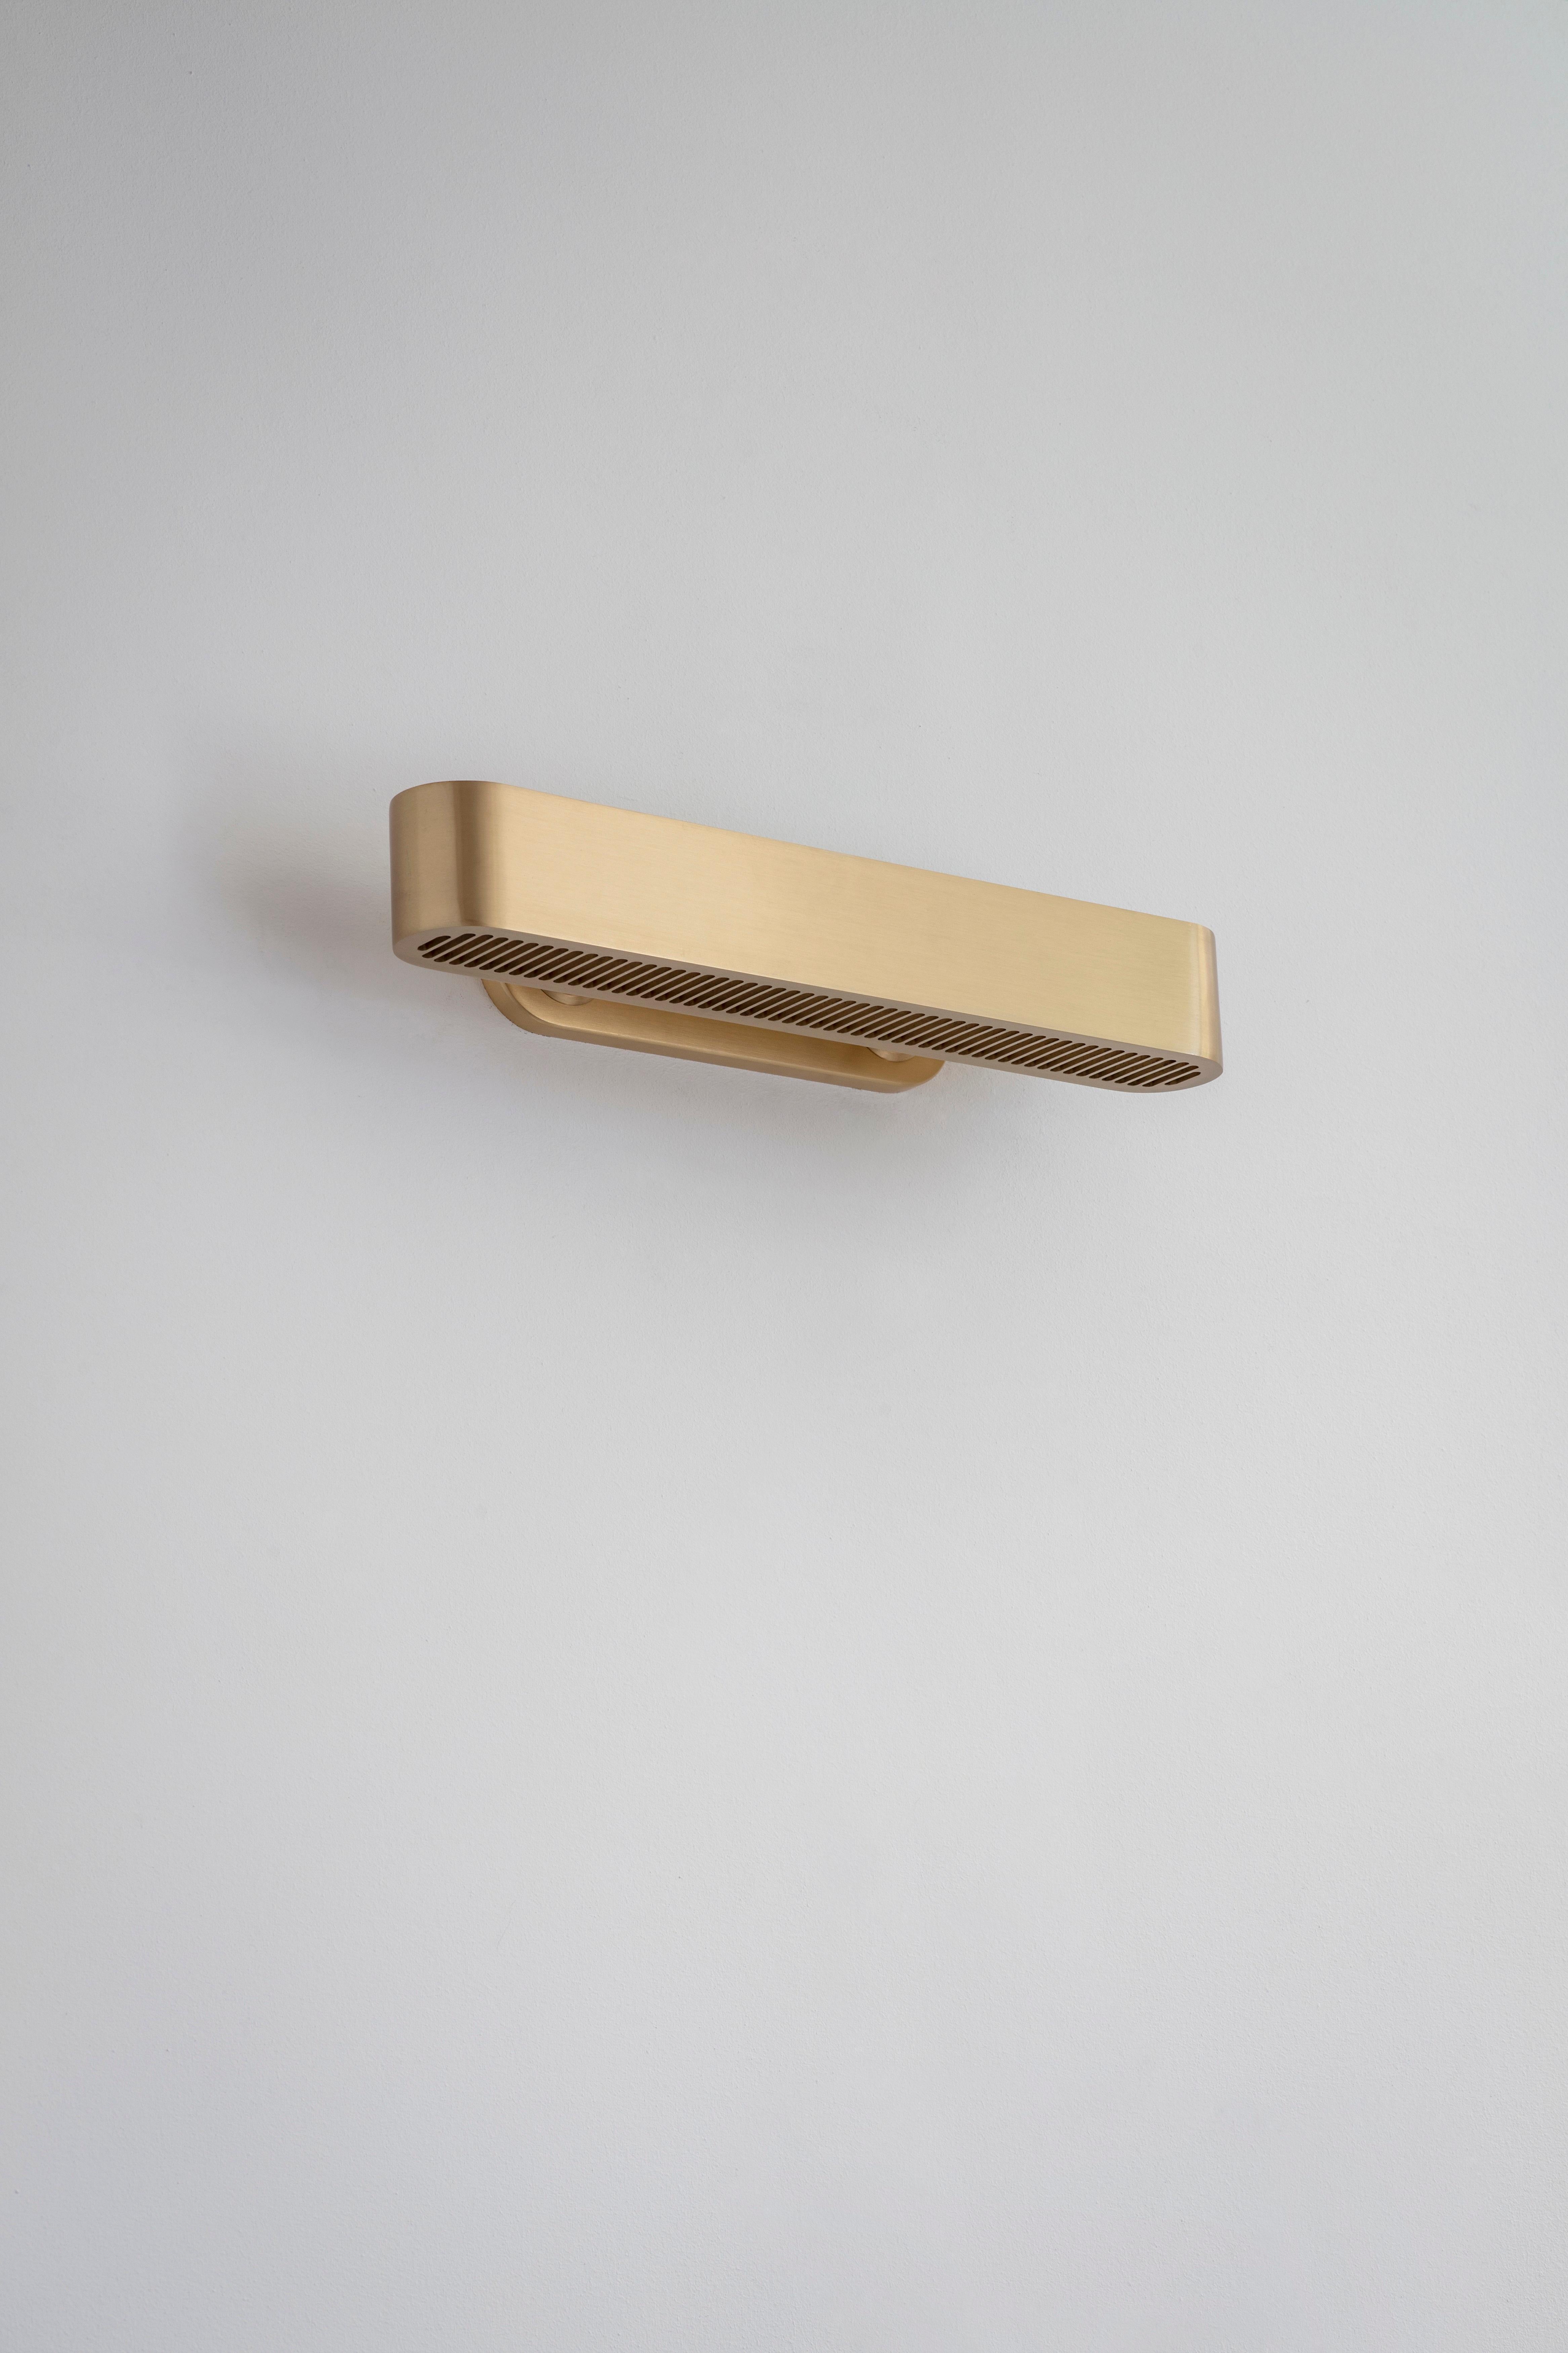 Colt wall light flush by Bert Frank
Dimensions: 9.7 x 40.2 x 6 cm
Materials: Brass, bronze

Brushed brass lacquered as standard, custom finishes available.

The Bert Frank aesthetic is one of subtle quirks and twists. Asymmetry is one of